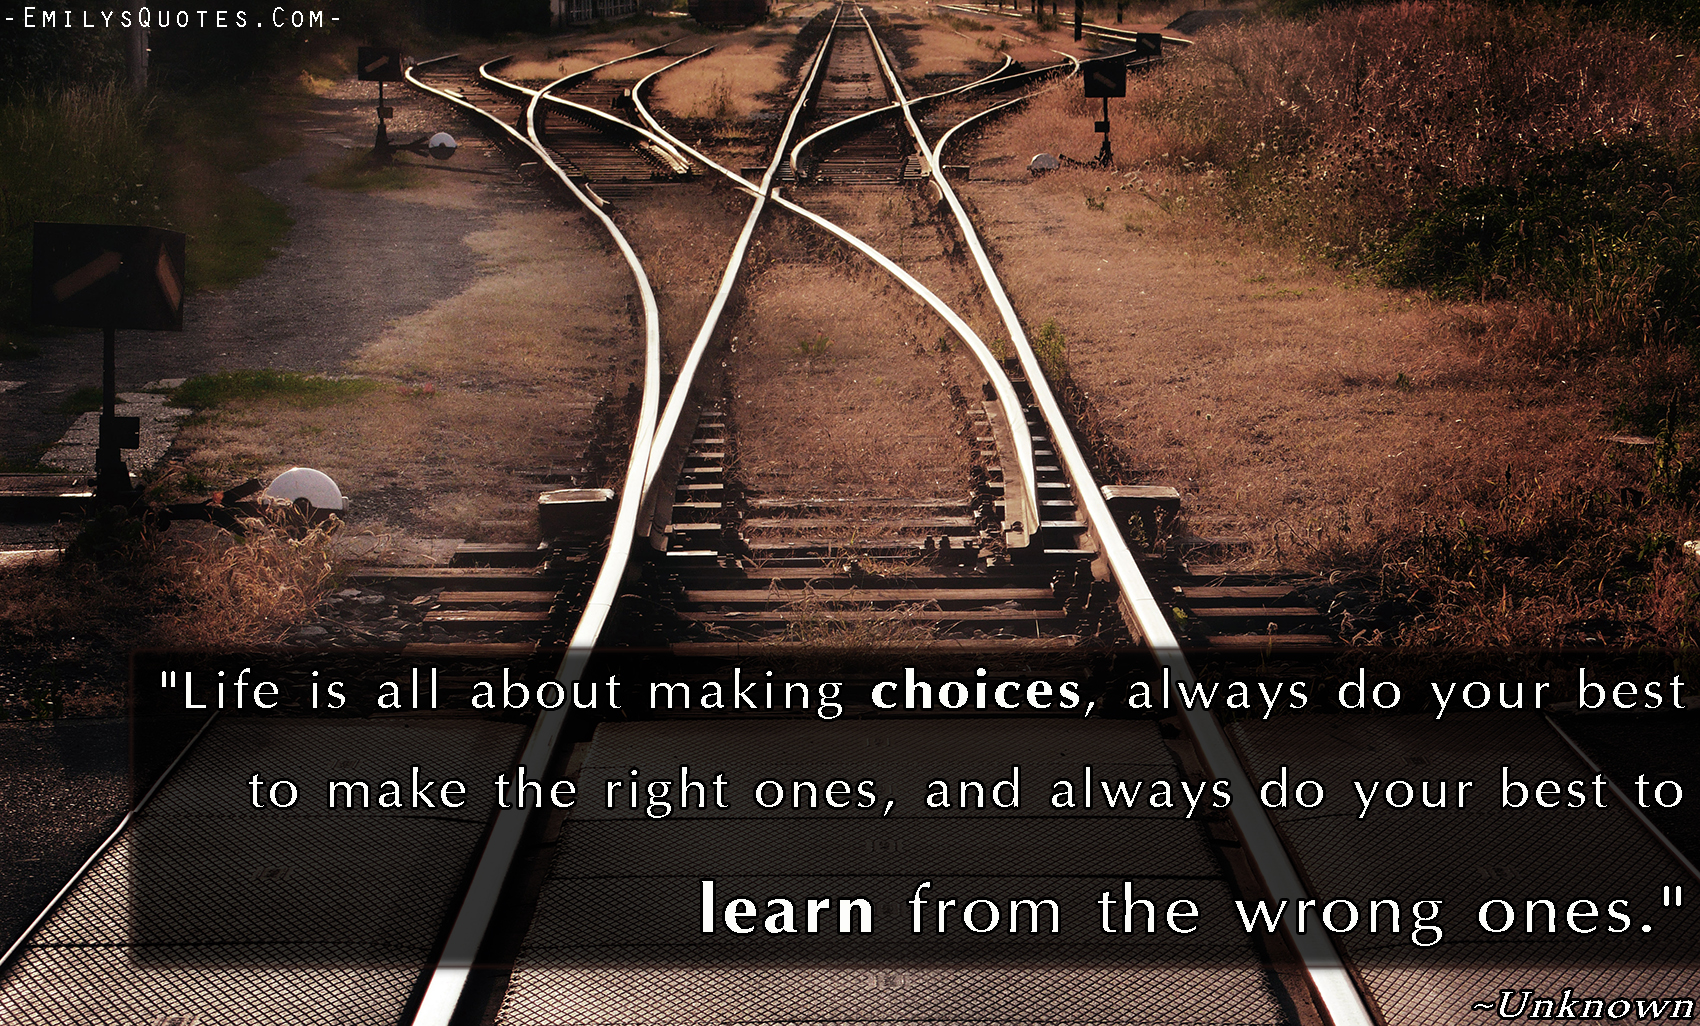 Life is all about making choices, always do your best to make the right ones, and always do your best to learn from the wrong ones